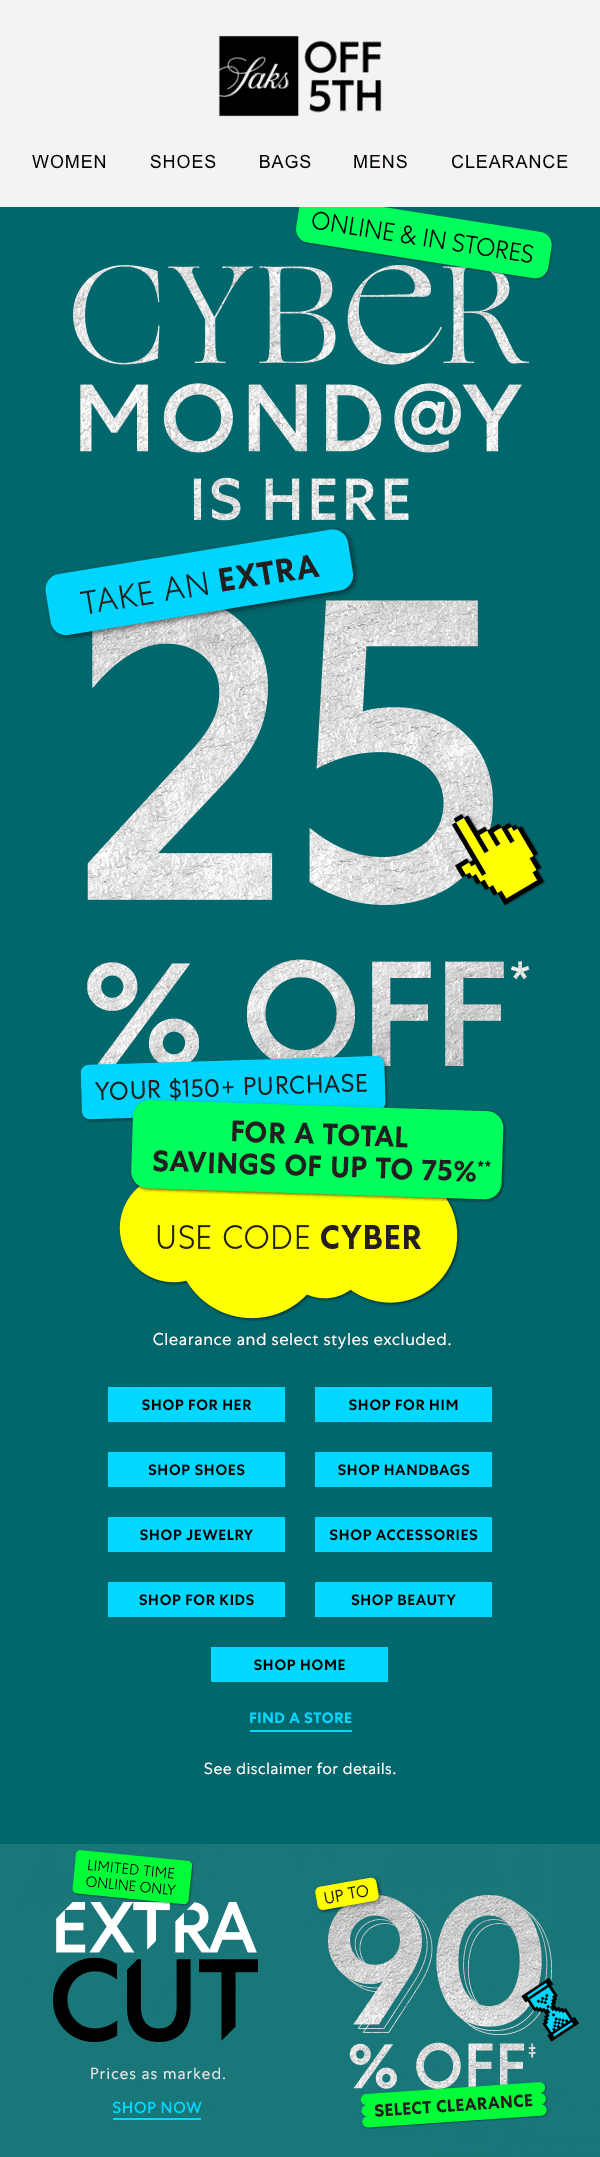 Saks OFF 5TH Cyber Deals 2023 Email 1